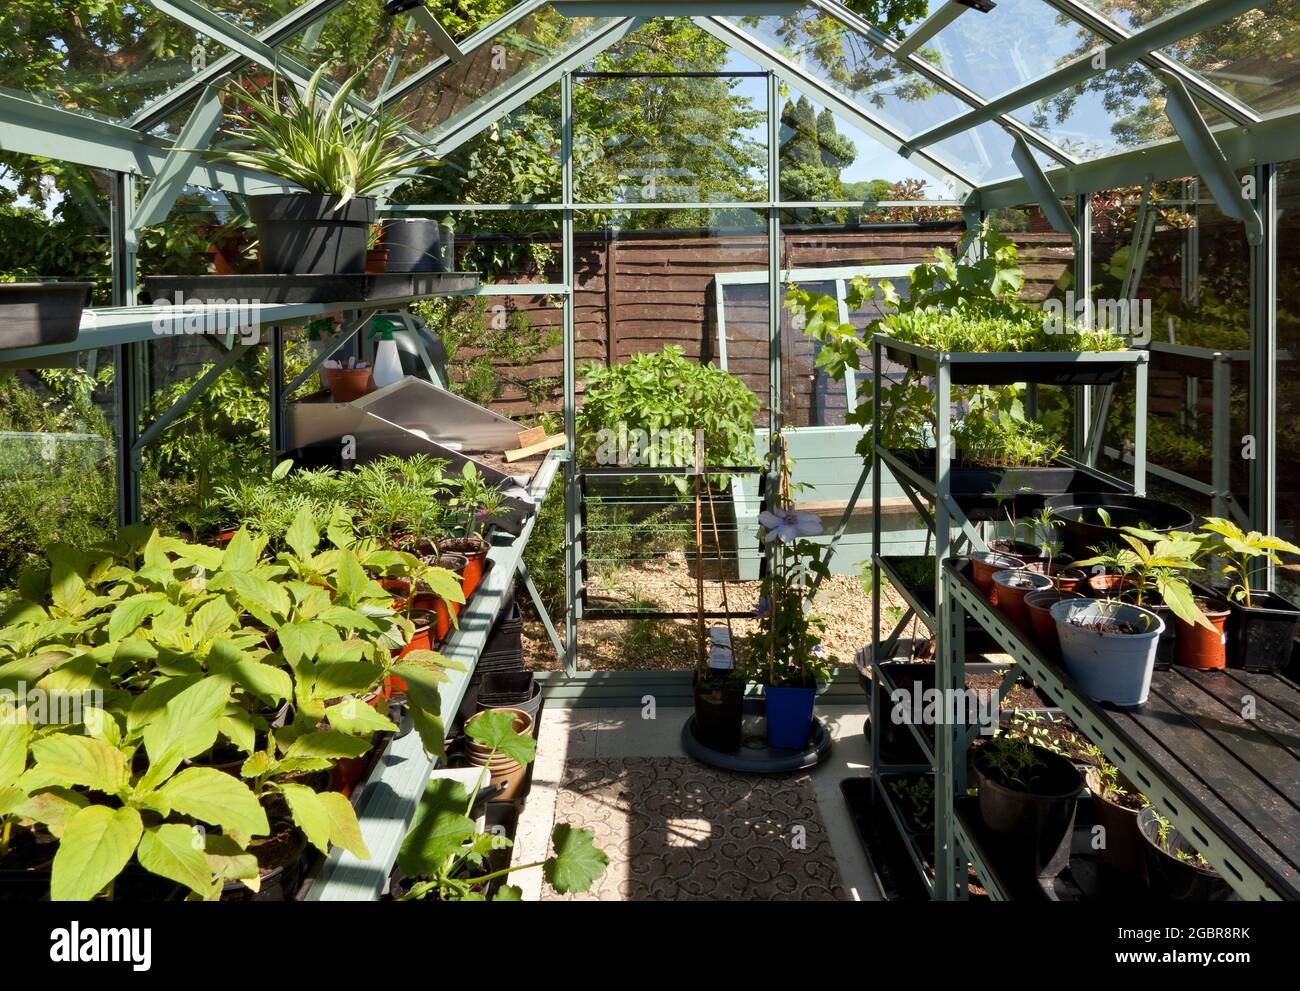 Interior of domestic greenhouse with growing plants Stock Photo